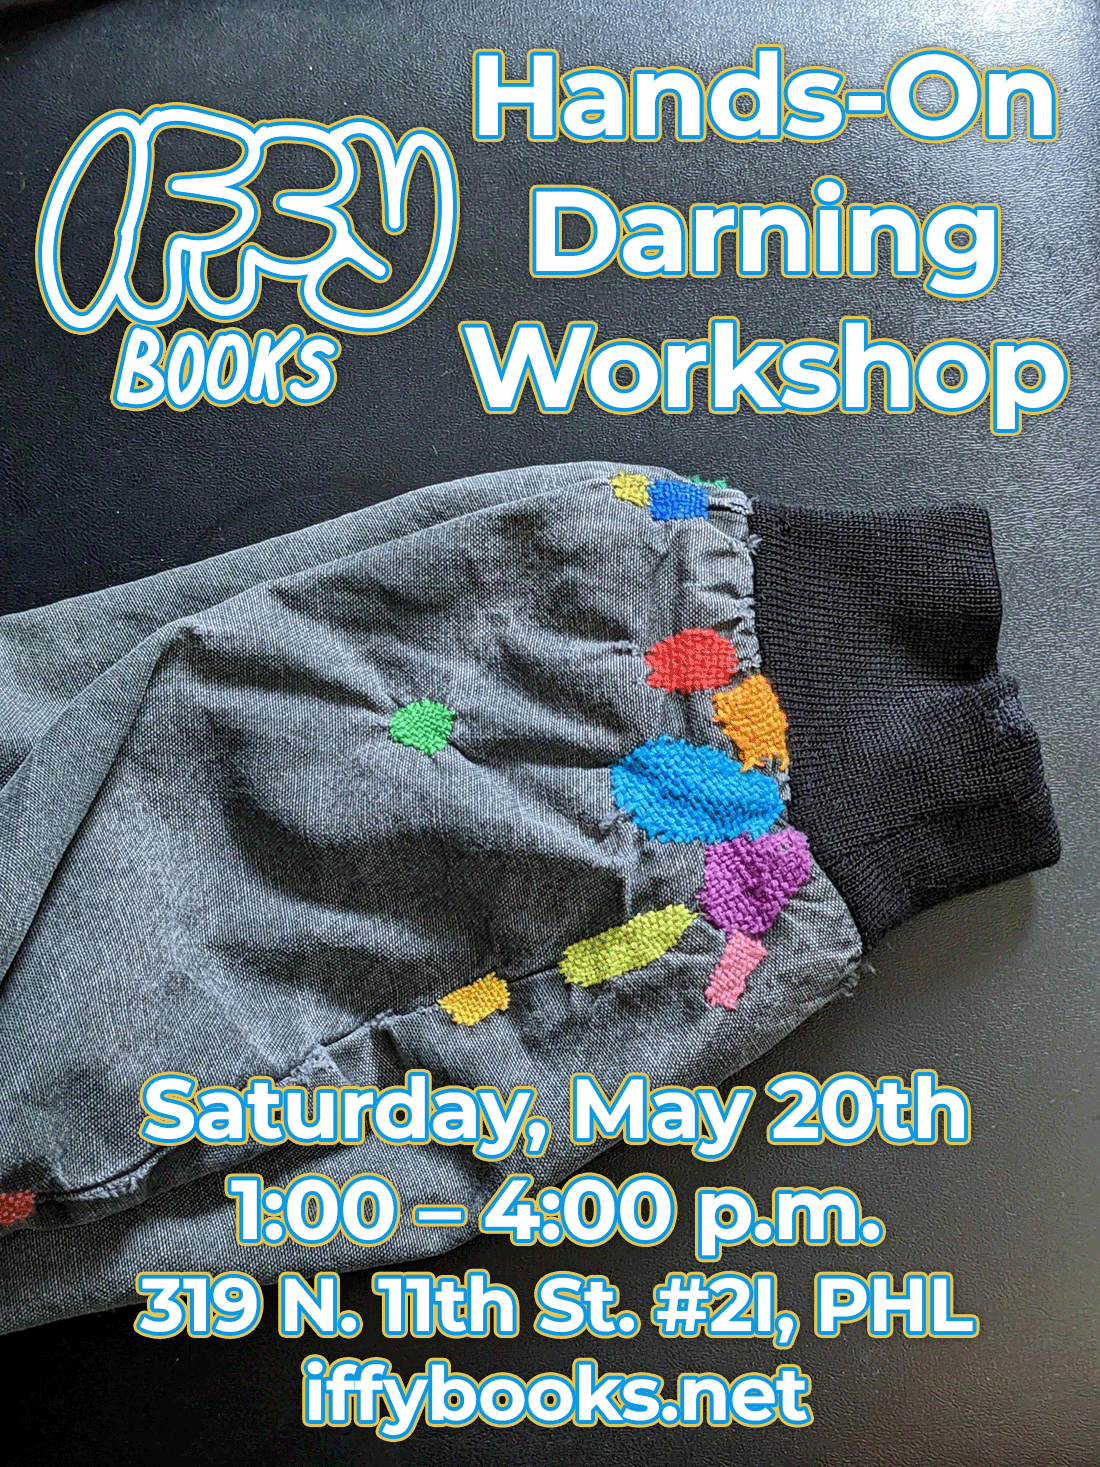 Flyer with a photo of a jacket sleeve, with about a dozen darned repairs done with colorful thread. The text reads as follows: Iffy Books Hands-On Darning Workshop Saturday, May 20th 1:00 – 4:00 p.m. 319 N. 11th St. #2I, PHL iffybooks.net